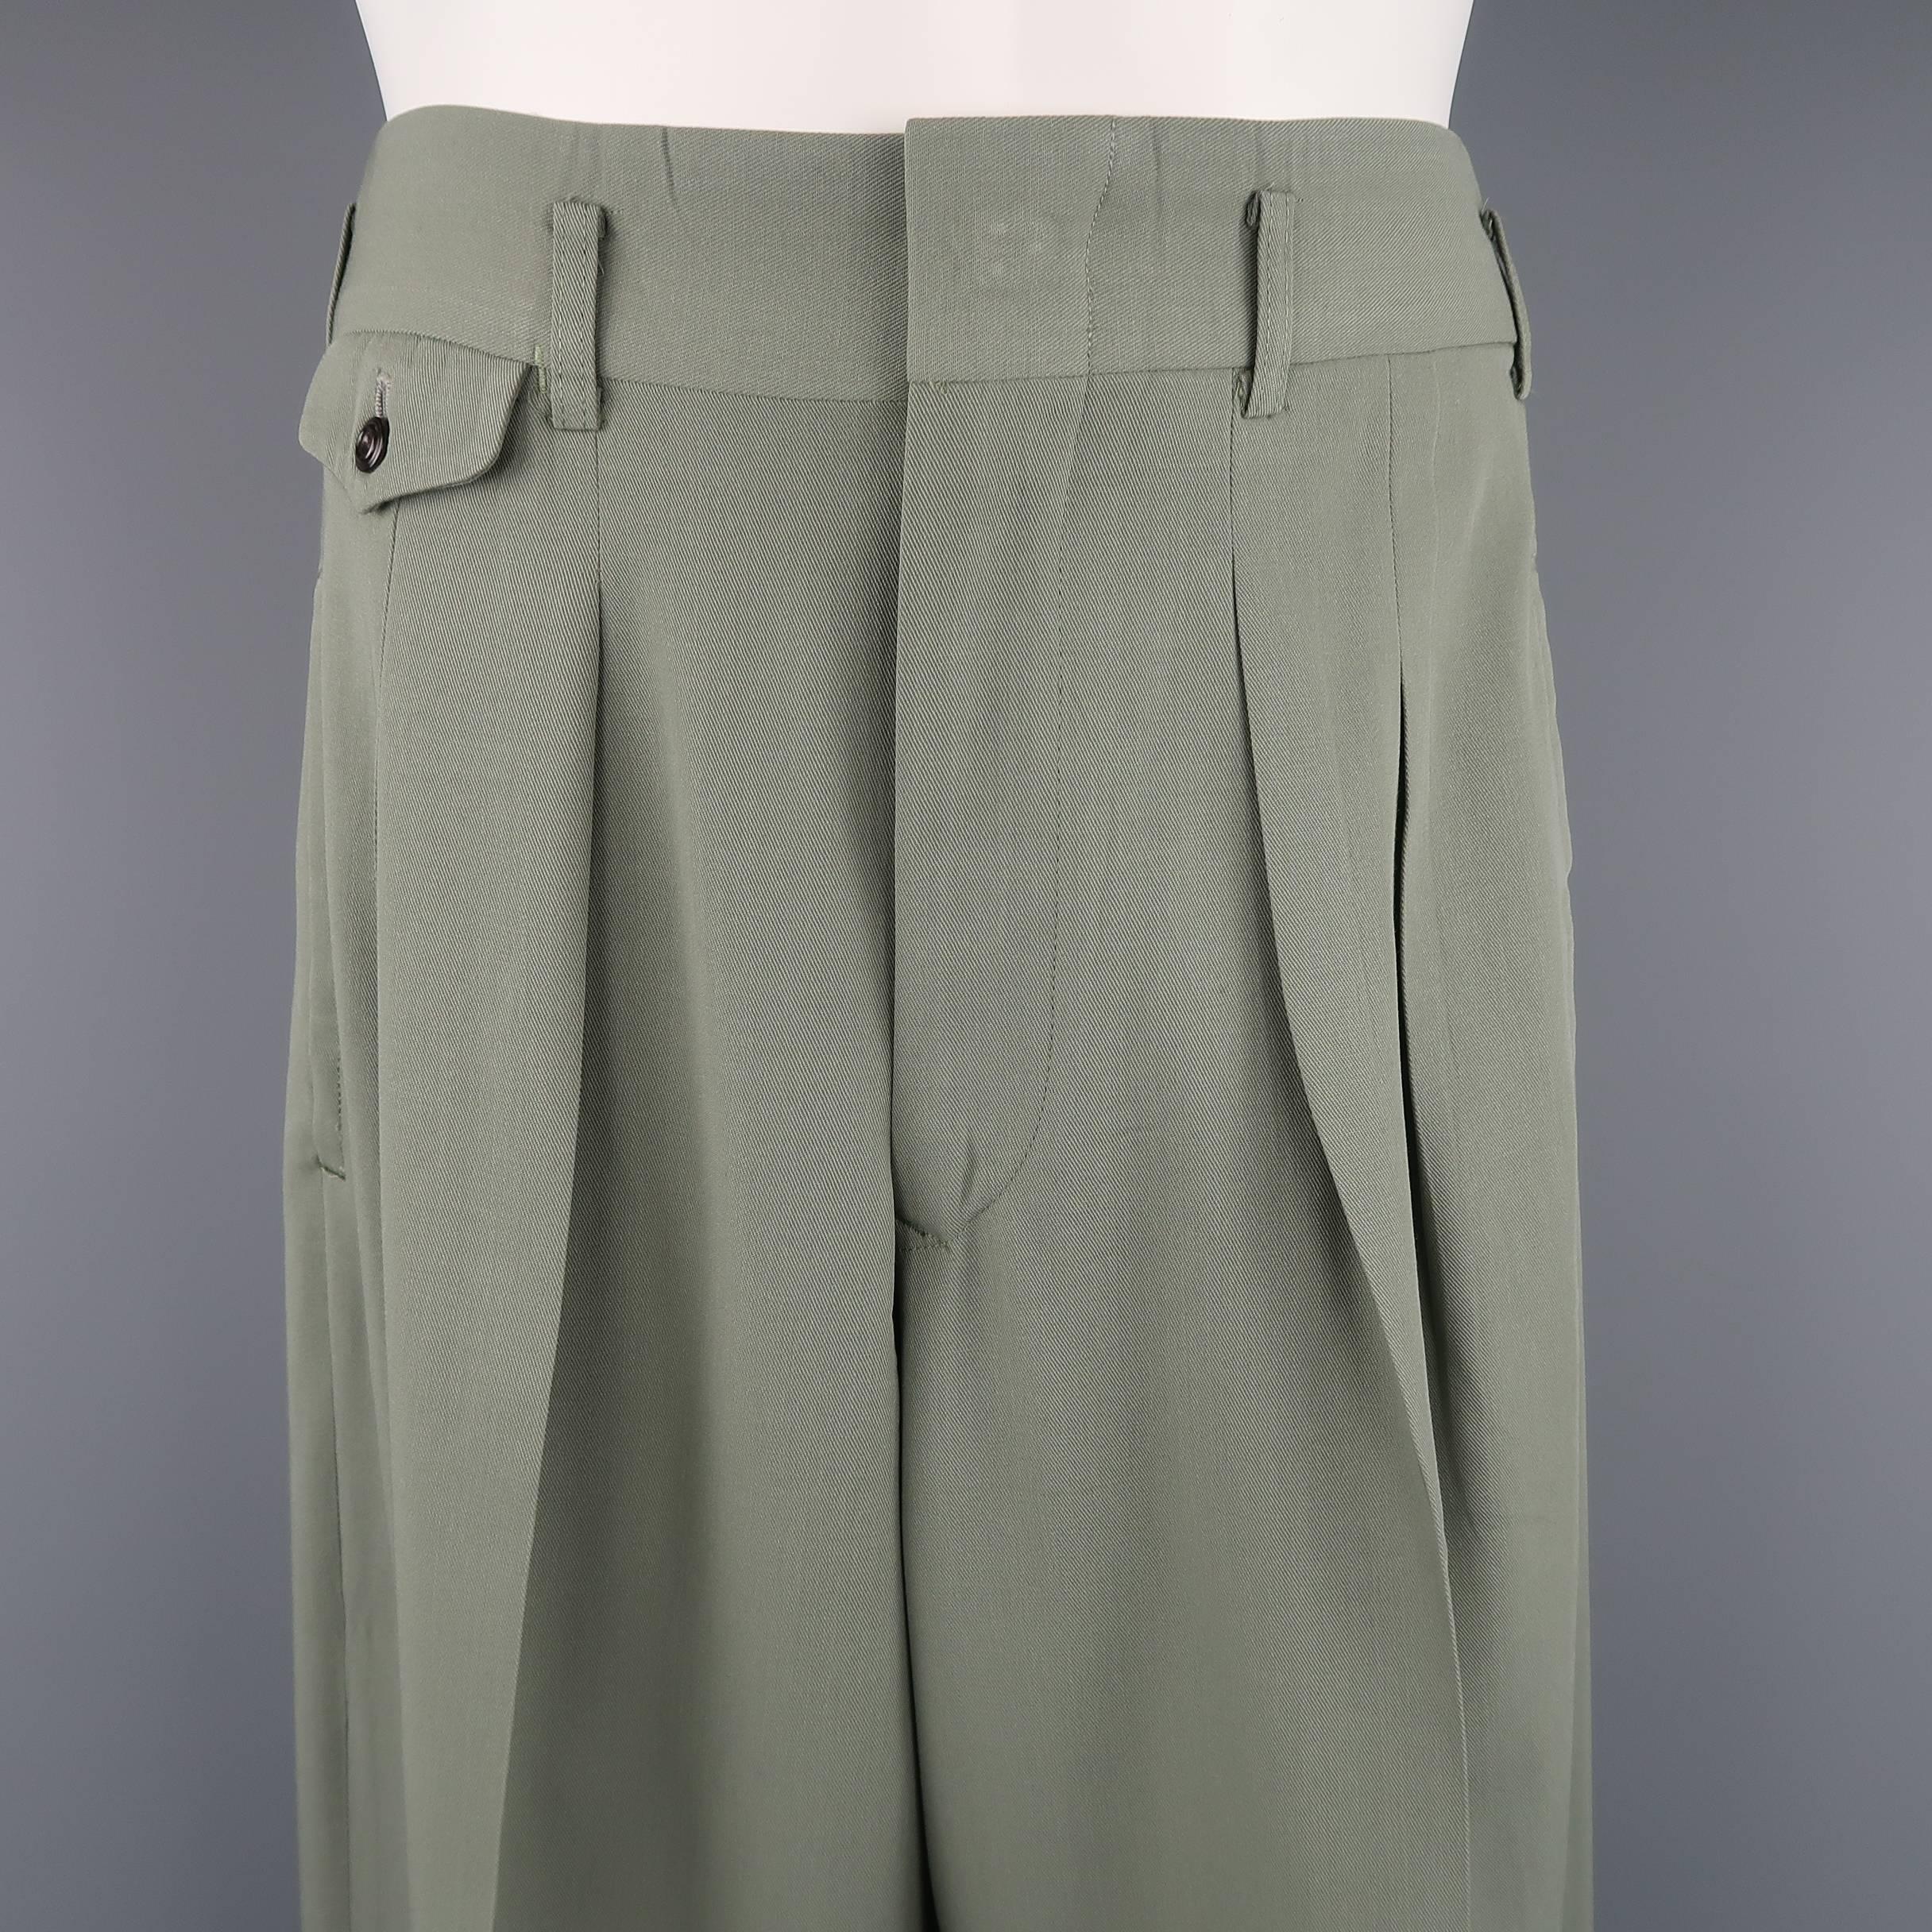 Vintage MATSUDA dress pants come in sage green wool twill with a high ride, box pleated front, wide tapered leg, cuffed hem. Made in Japan.
 
Good Pre-Owned Condition.
Marked: (No size)
 
Measurements:
 
Waist: 33 in.
Rise: 12.5 in.
Inseam: 31 in.
